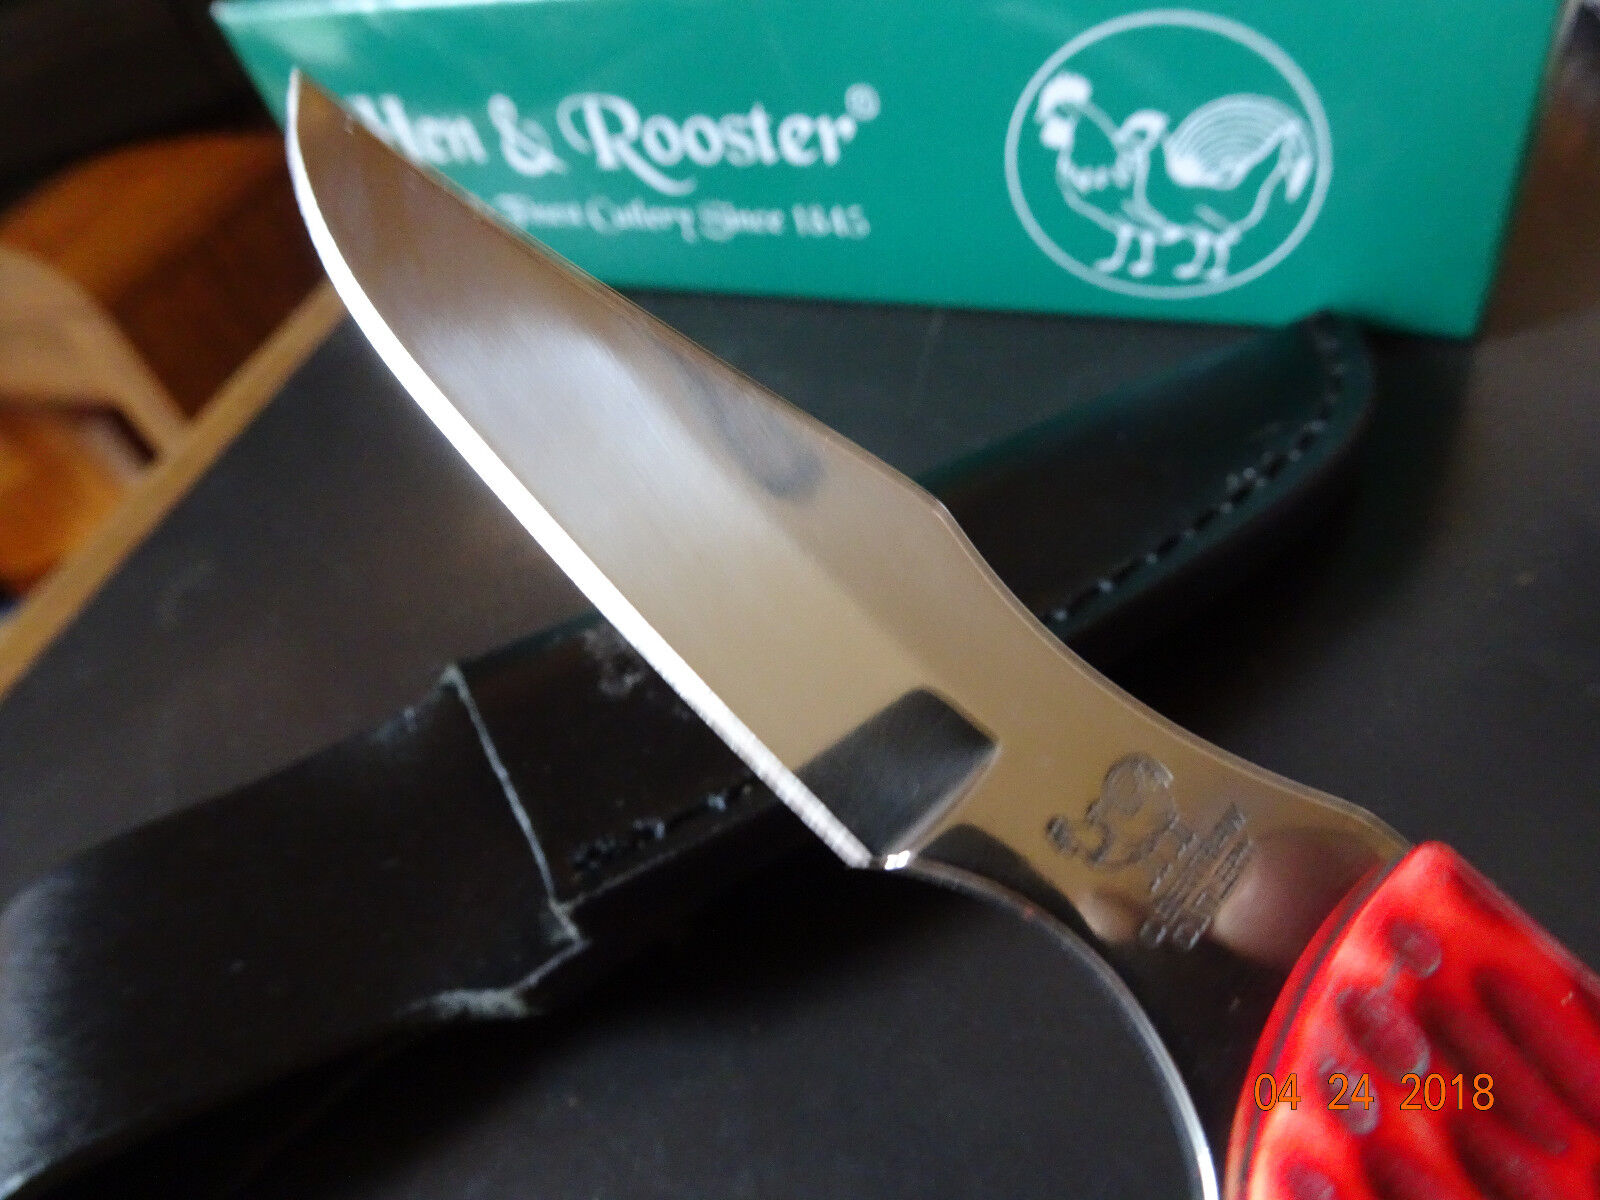 HEN & ROOSTER 6 1/2" CAPING KNIFE RED PICK BONE HANDLE 1095 GERMAN STAINLESS 